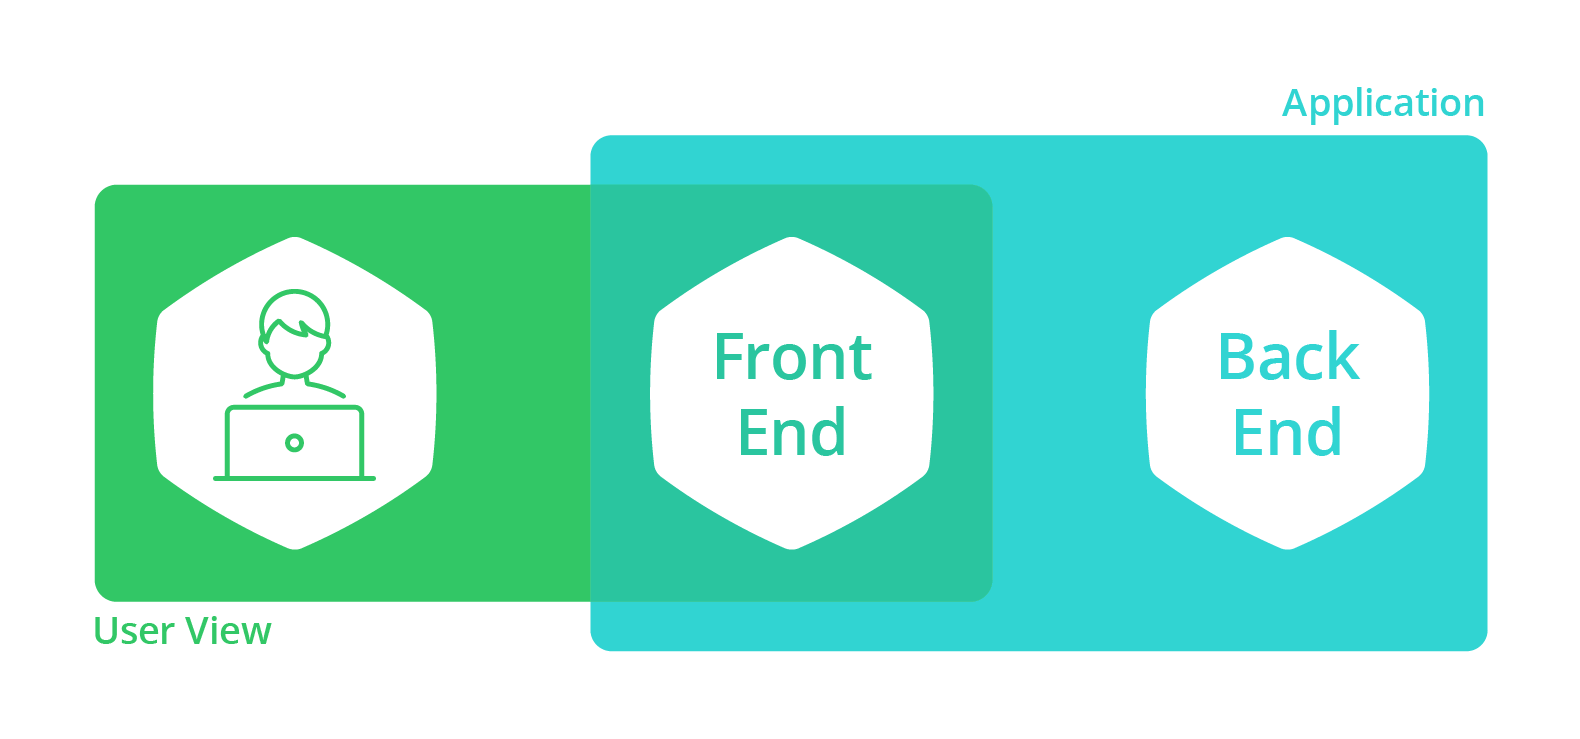 Visualisation of front-end and back-end of an application